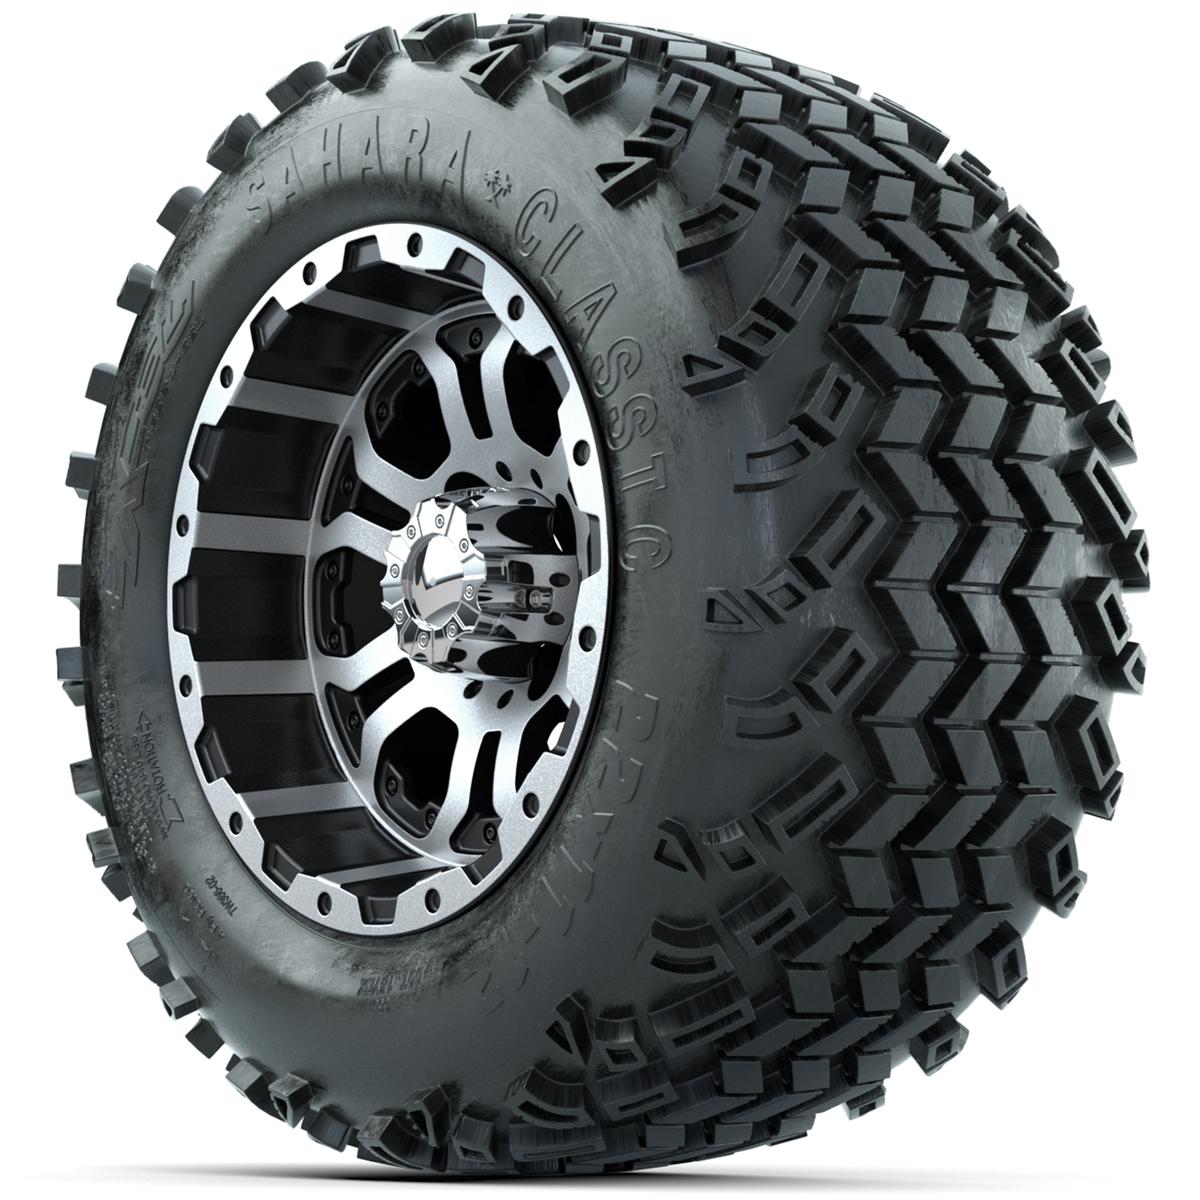 Set of (4) 12 in GTW Omega Wheels with 22x11-12 Sahara Classic All-Terrain Tires